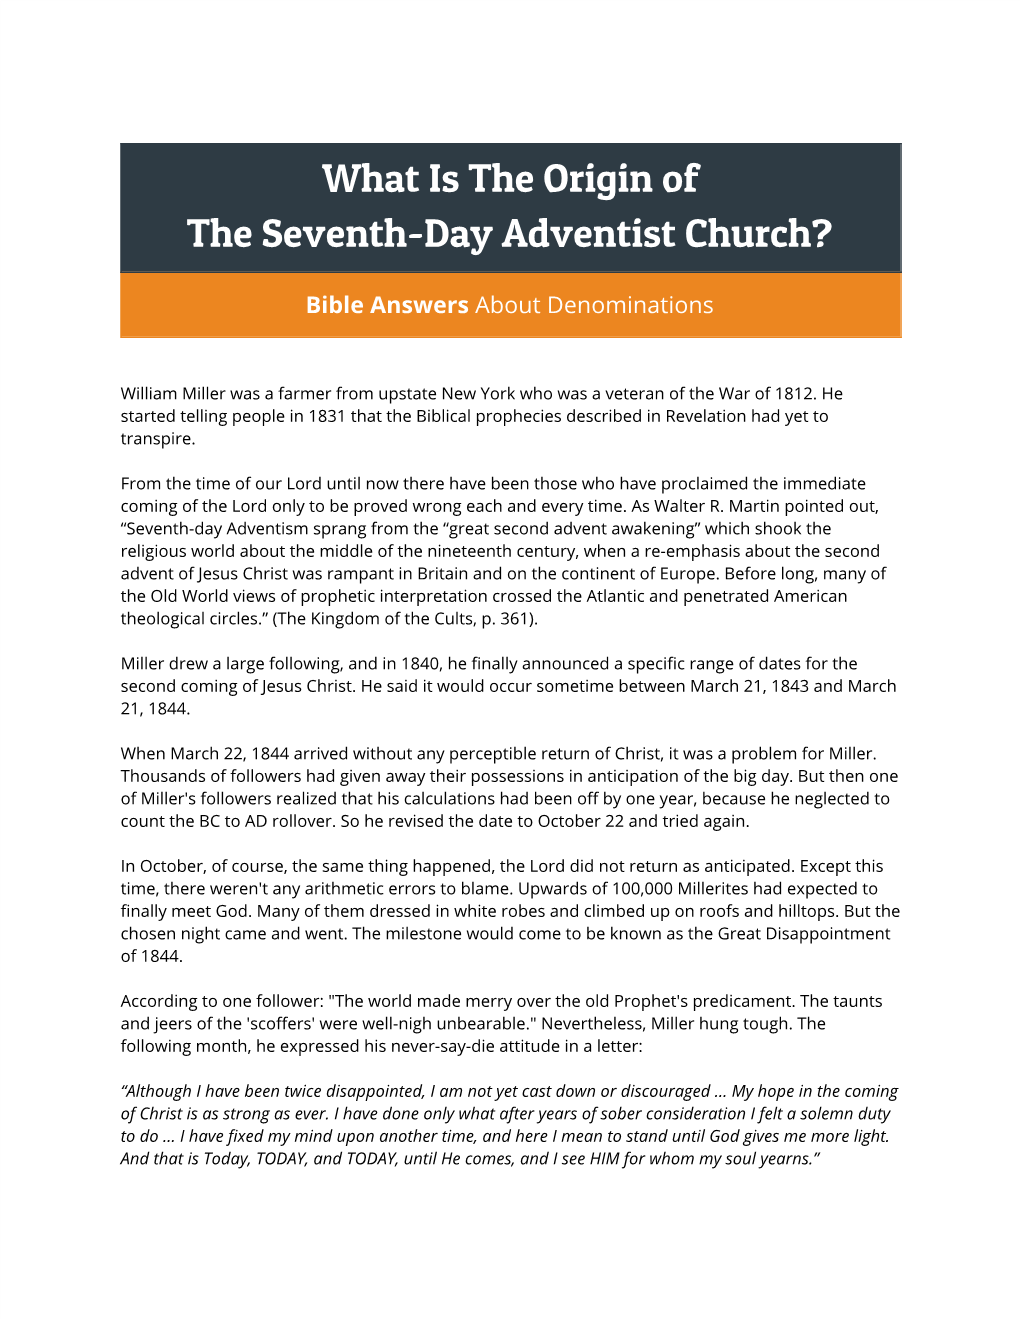 What Is the Origin of the Seventh-Day Adventist Church?